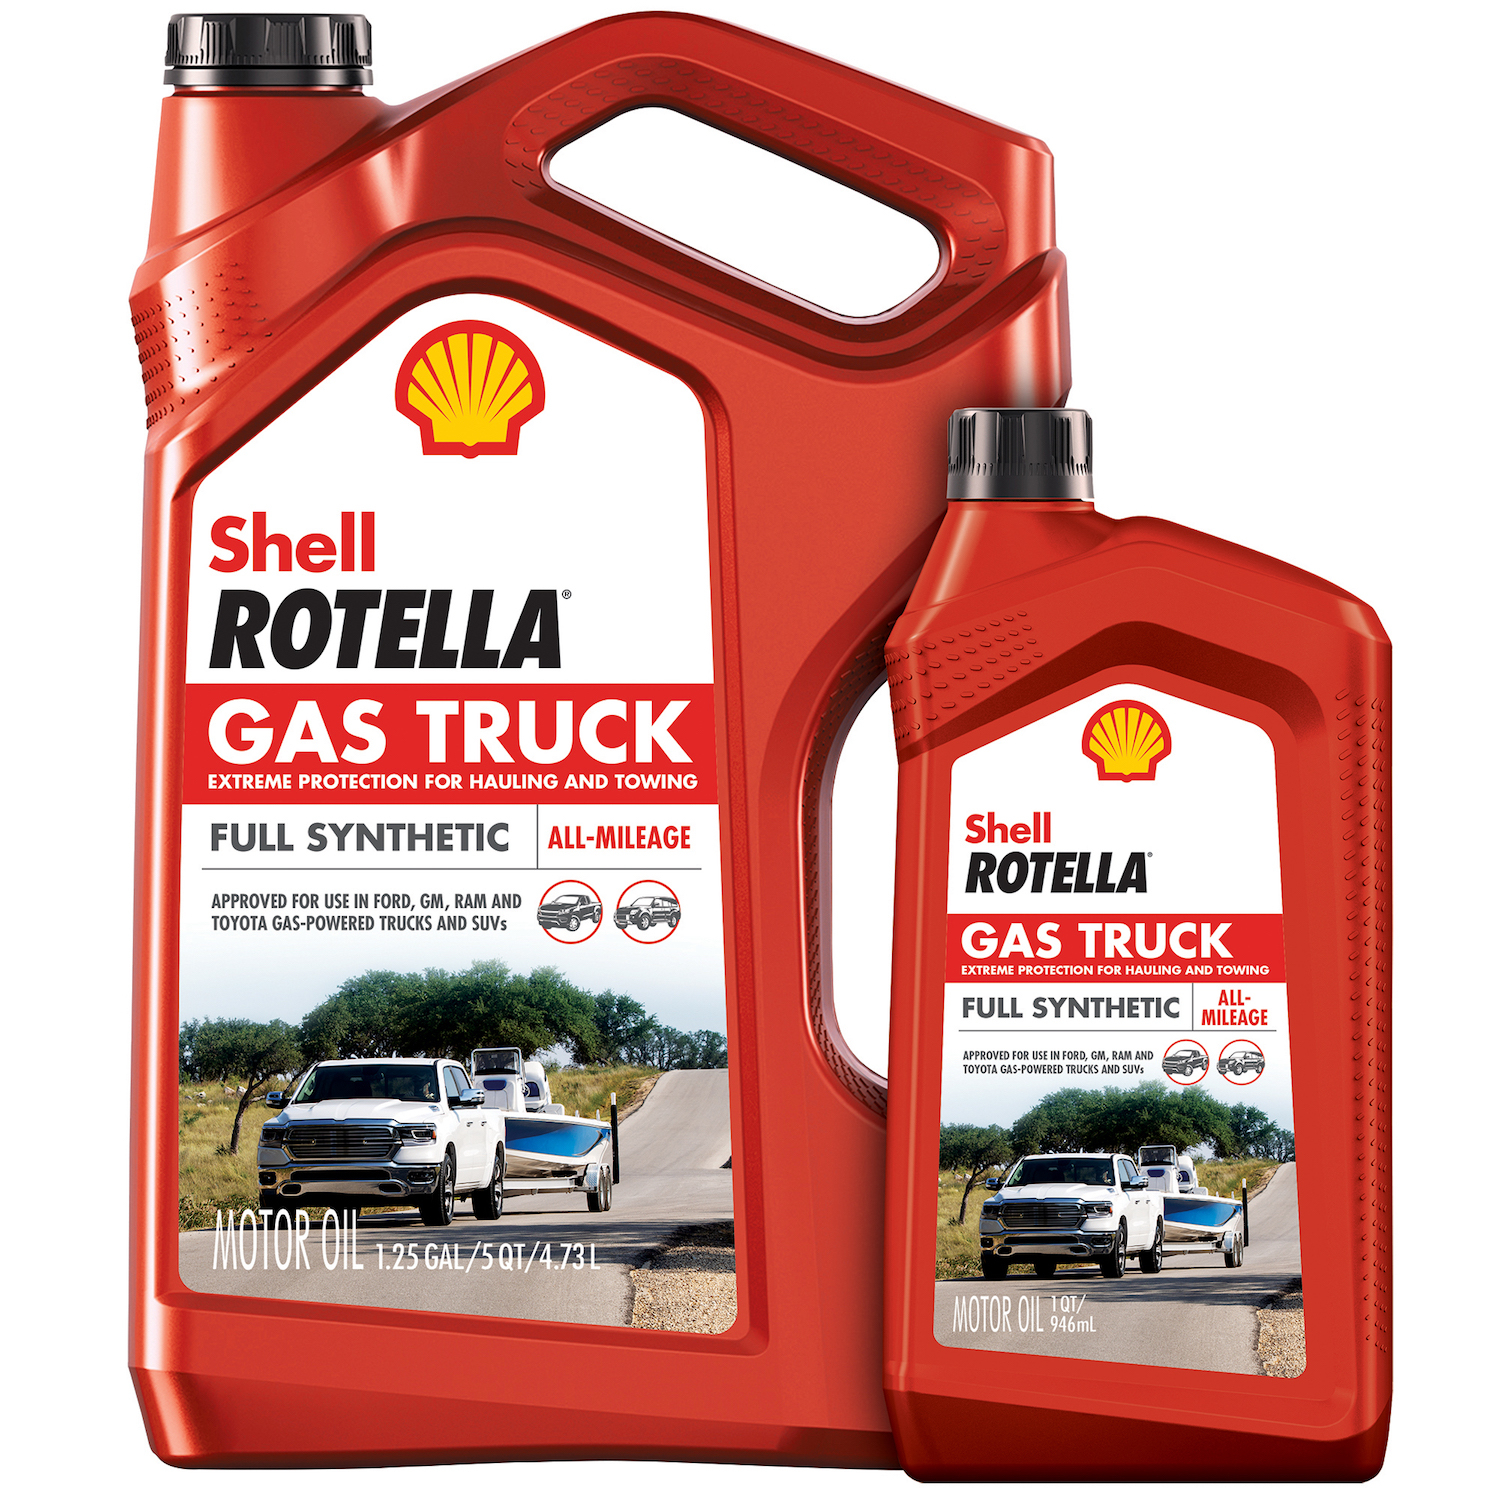 Shell Rotella Gas Truck Engine Oil Construction Equipment